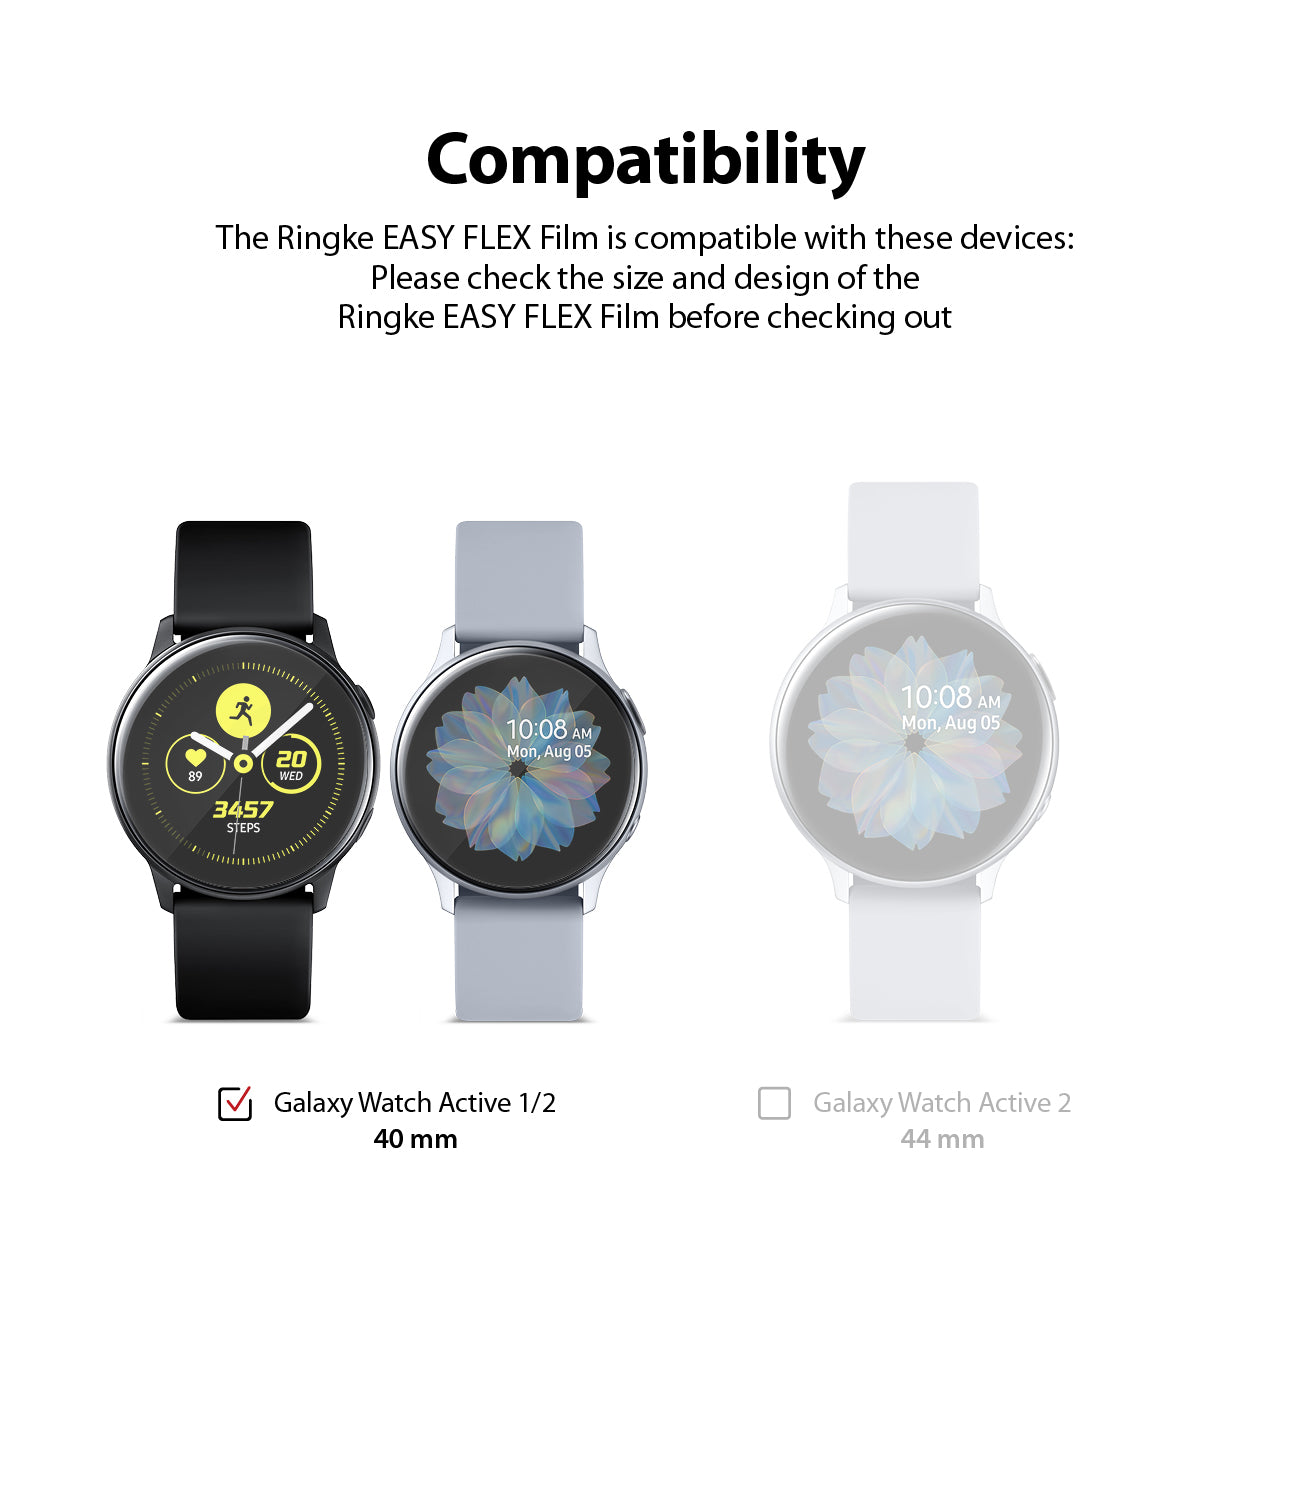 only compatible with galaxy watch active 1/2 40mm